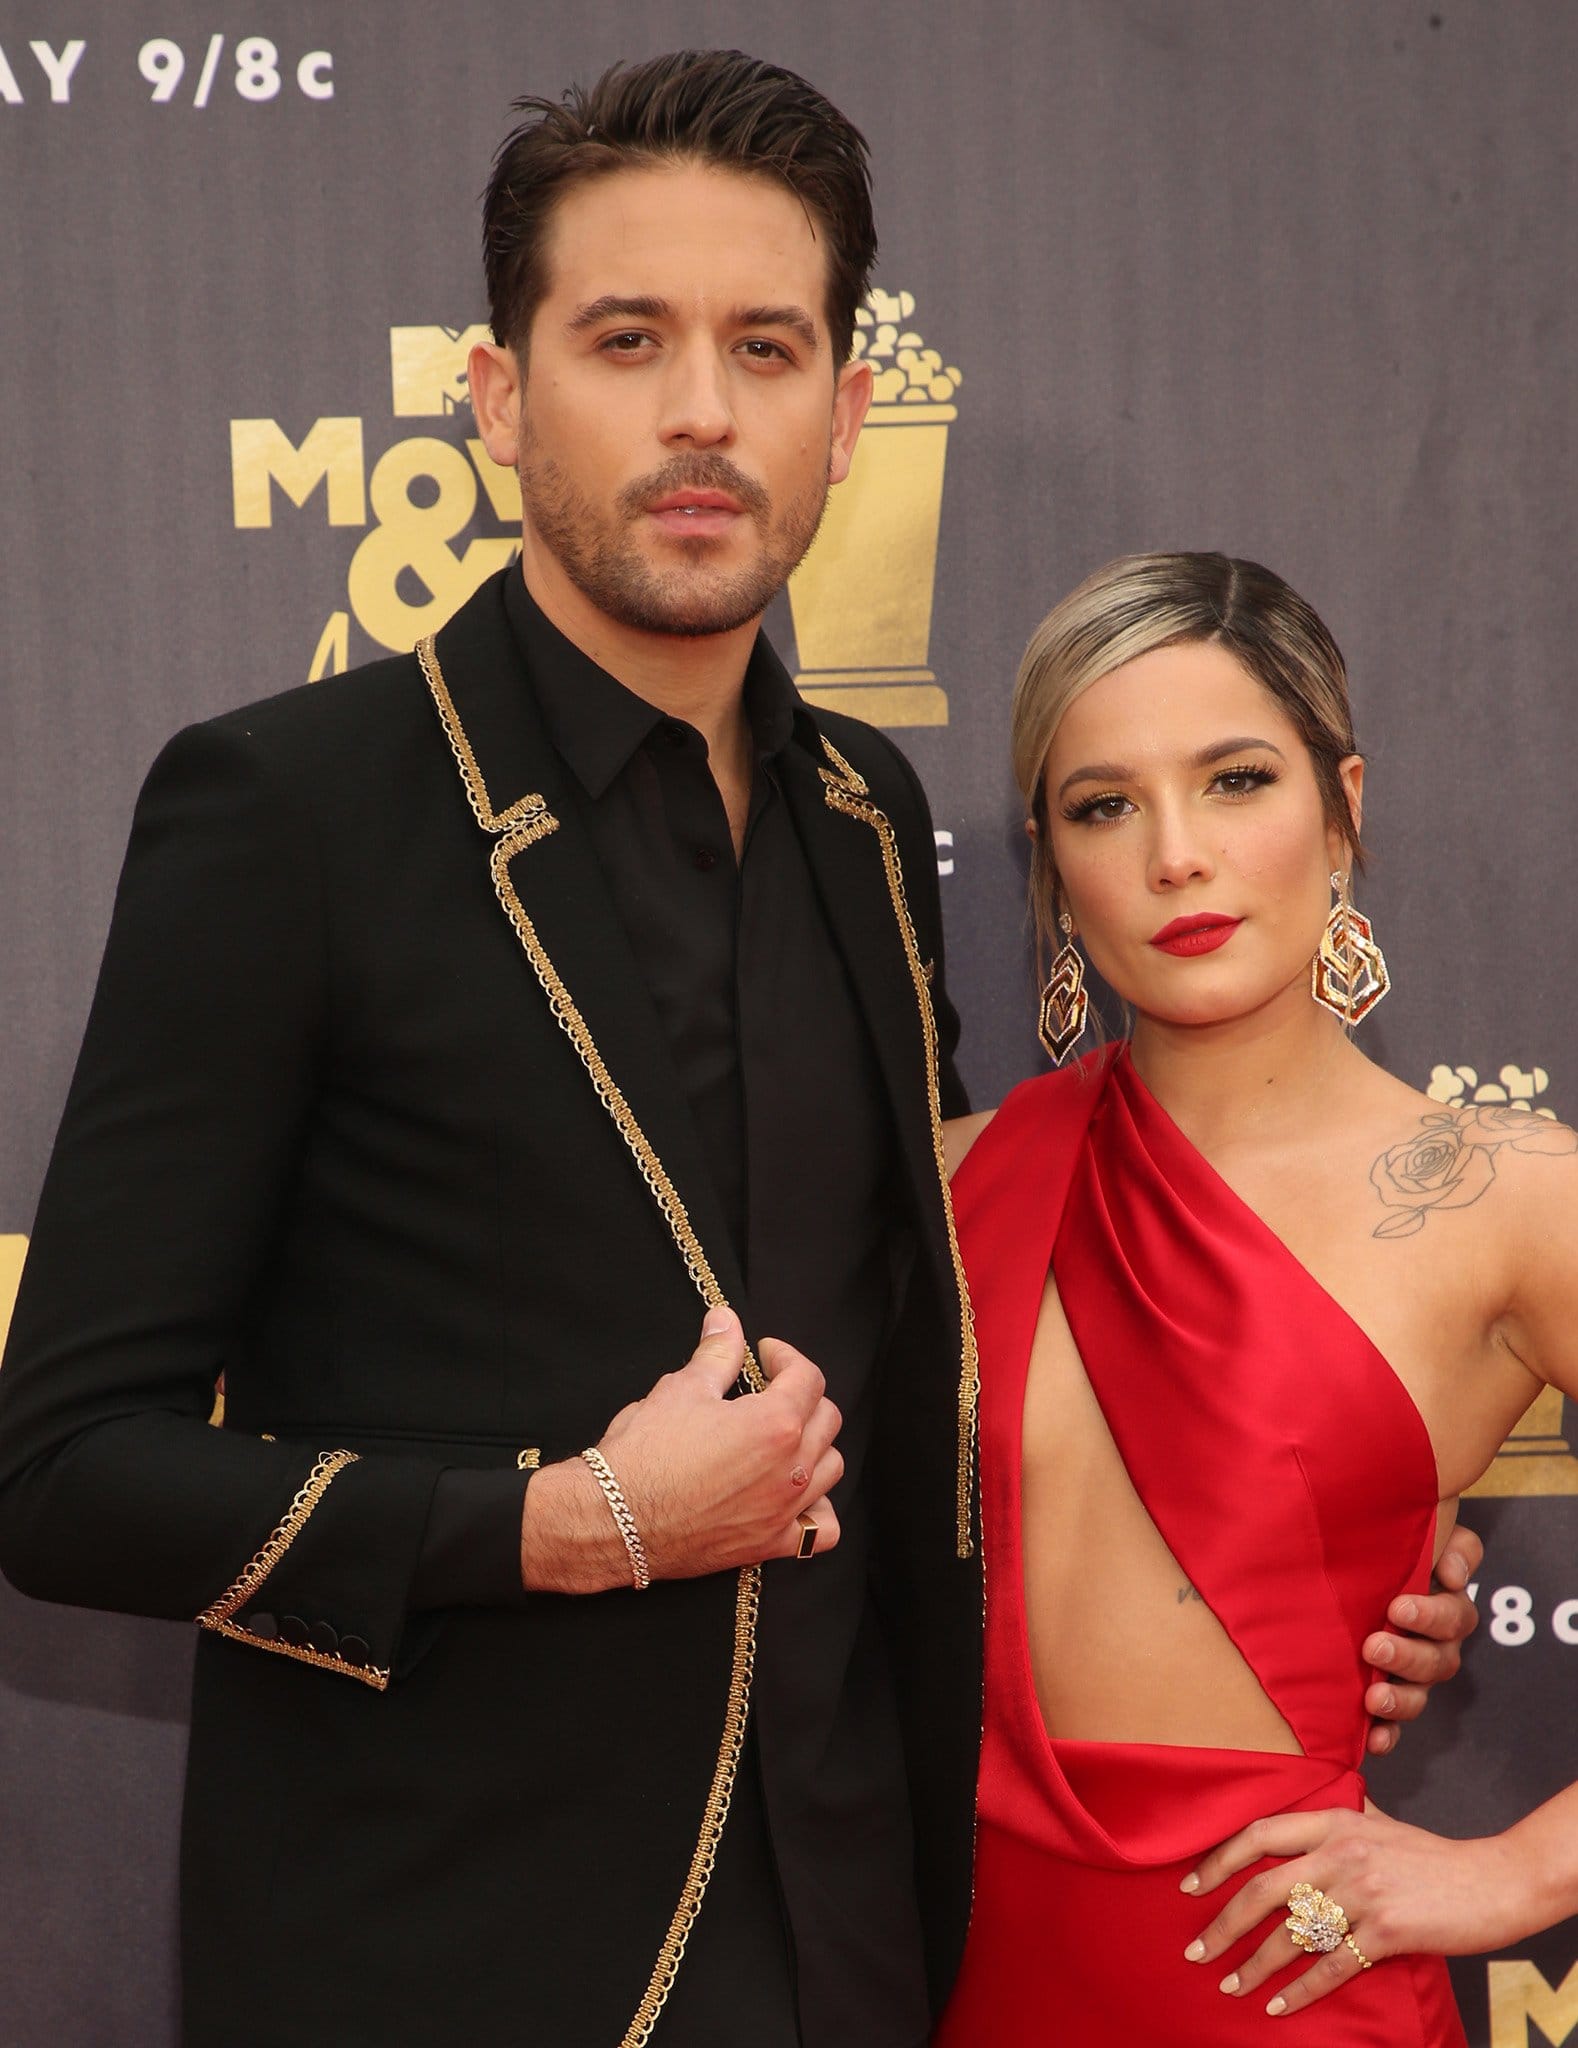 Halsey was in an on-and-off relationship with rapper G-Eazy from the summer of 2017 to early 2019